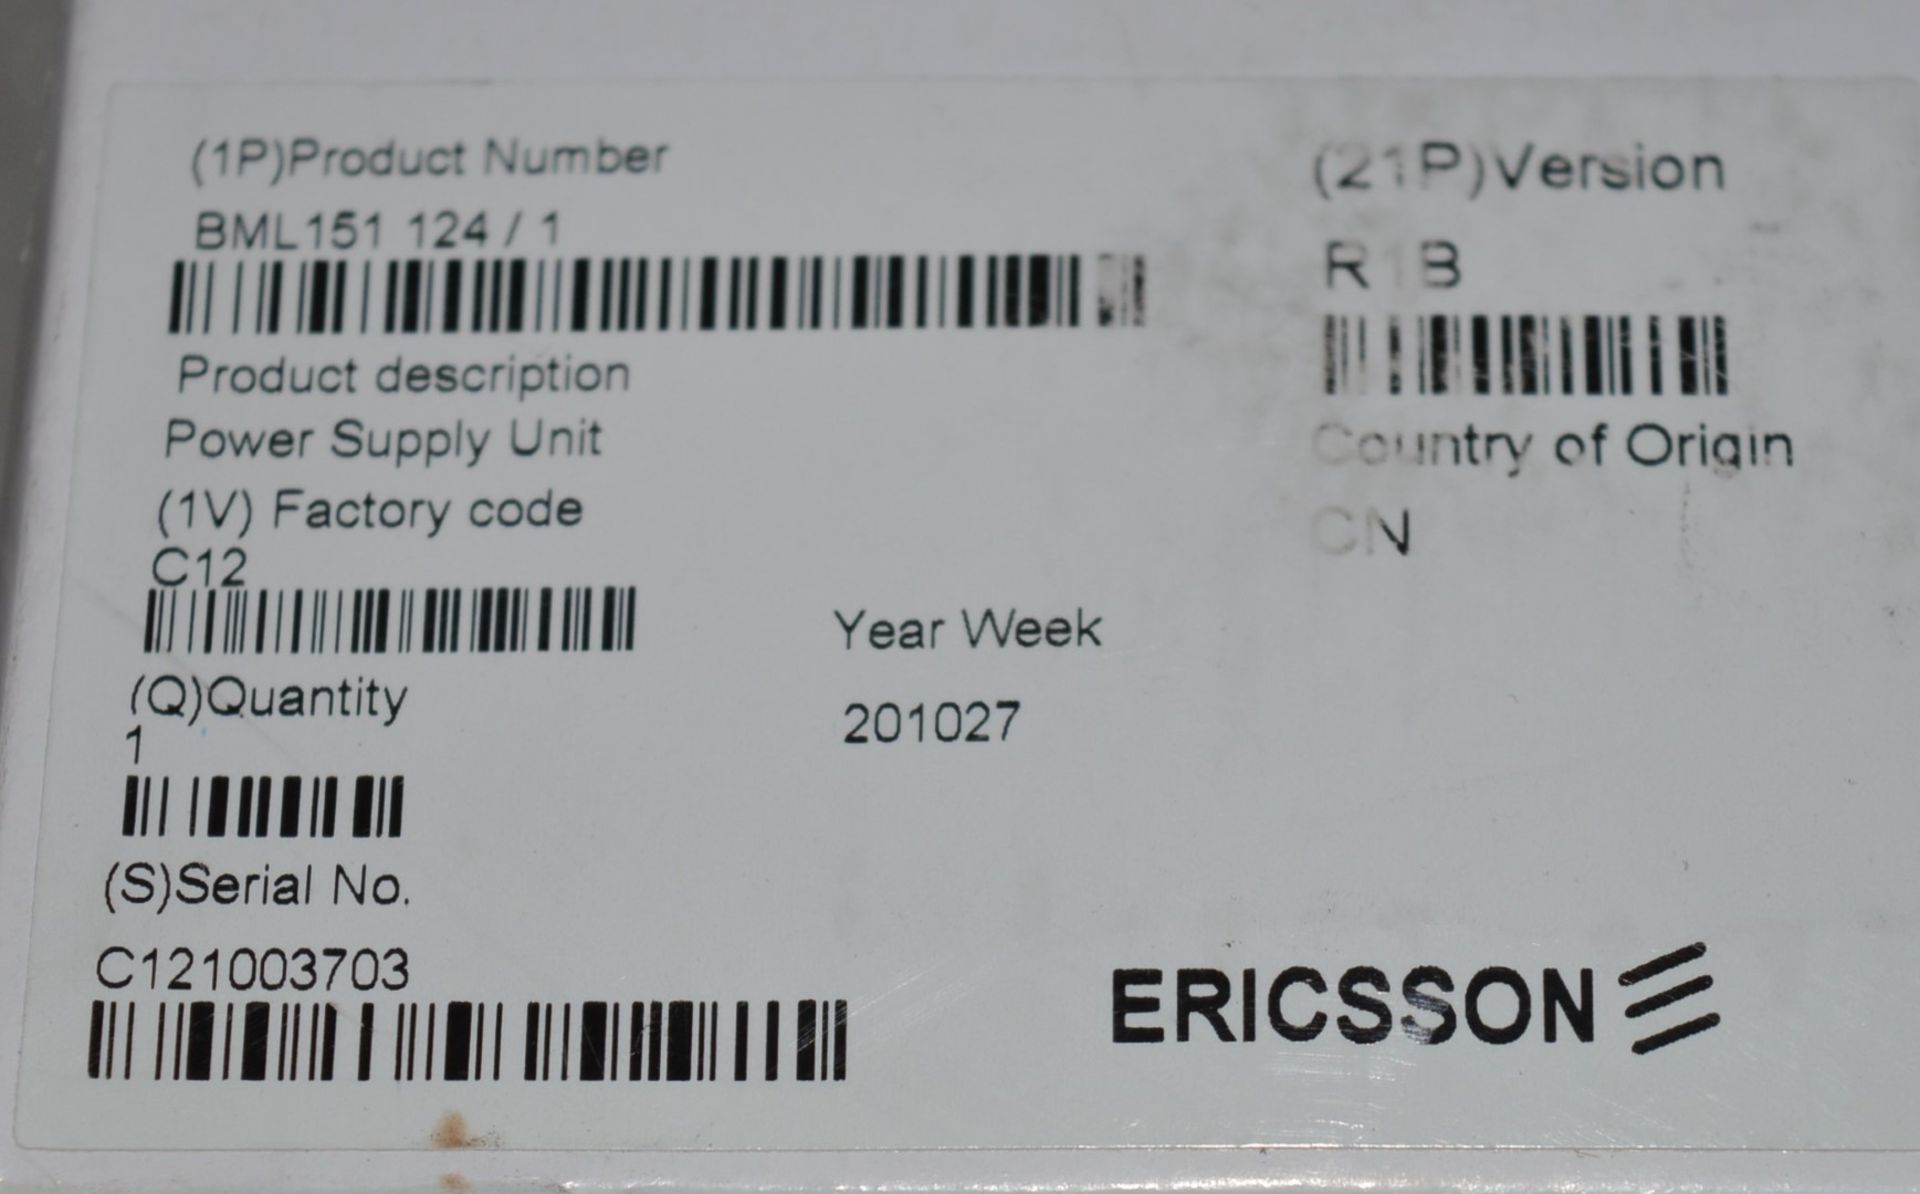 4 x Ericsson Power Supply Units - Product Code BML151 - Brand New Boxed Stock - Manufactured - Image 2 of 6